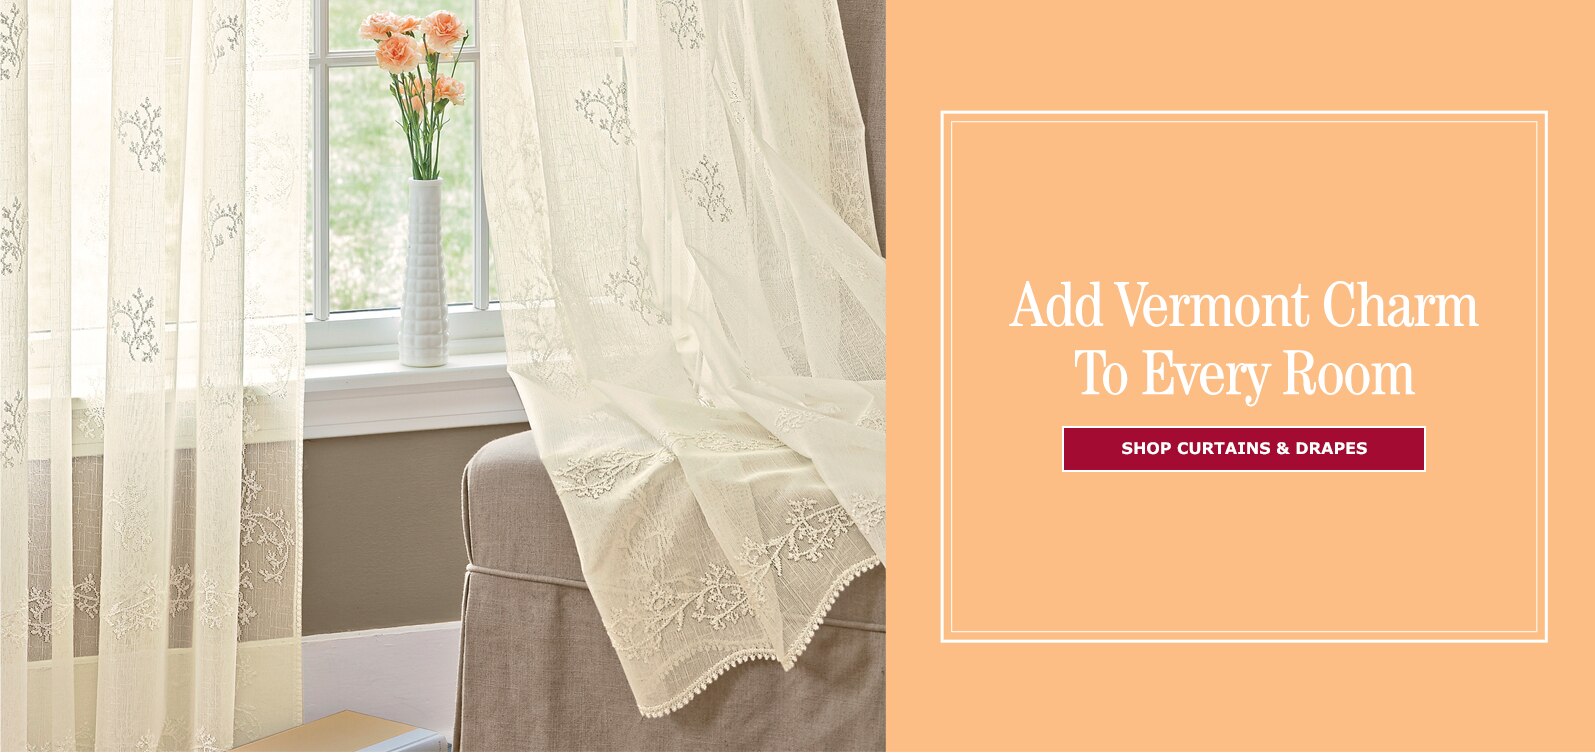 Add Vermont Charm to Every Room. Shop Curtains & Drapes